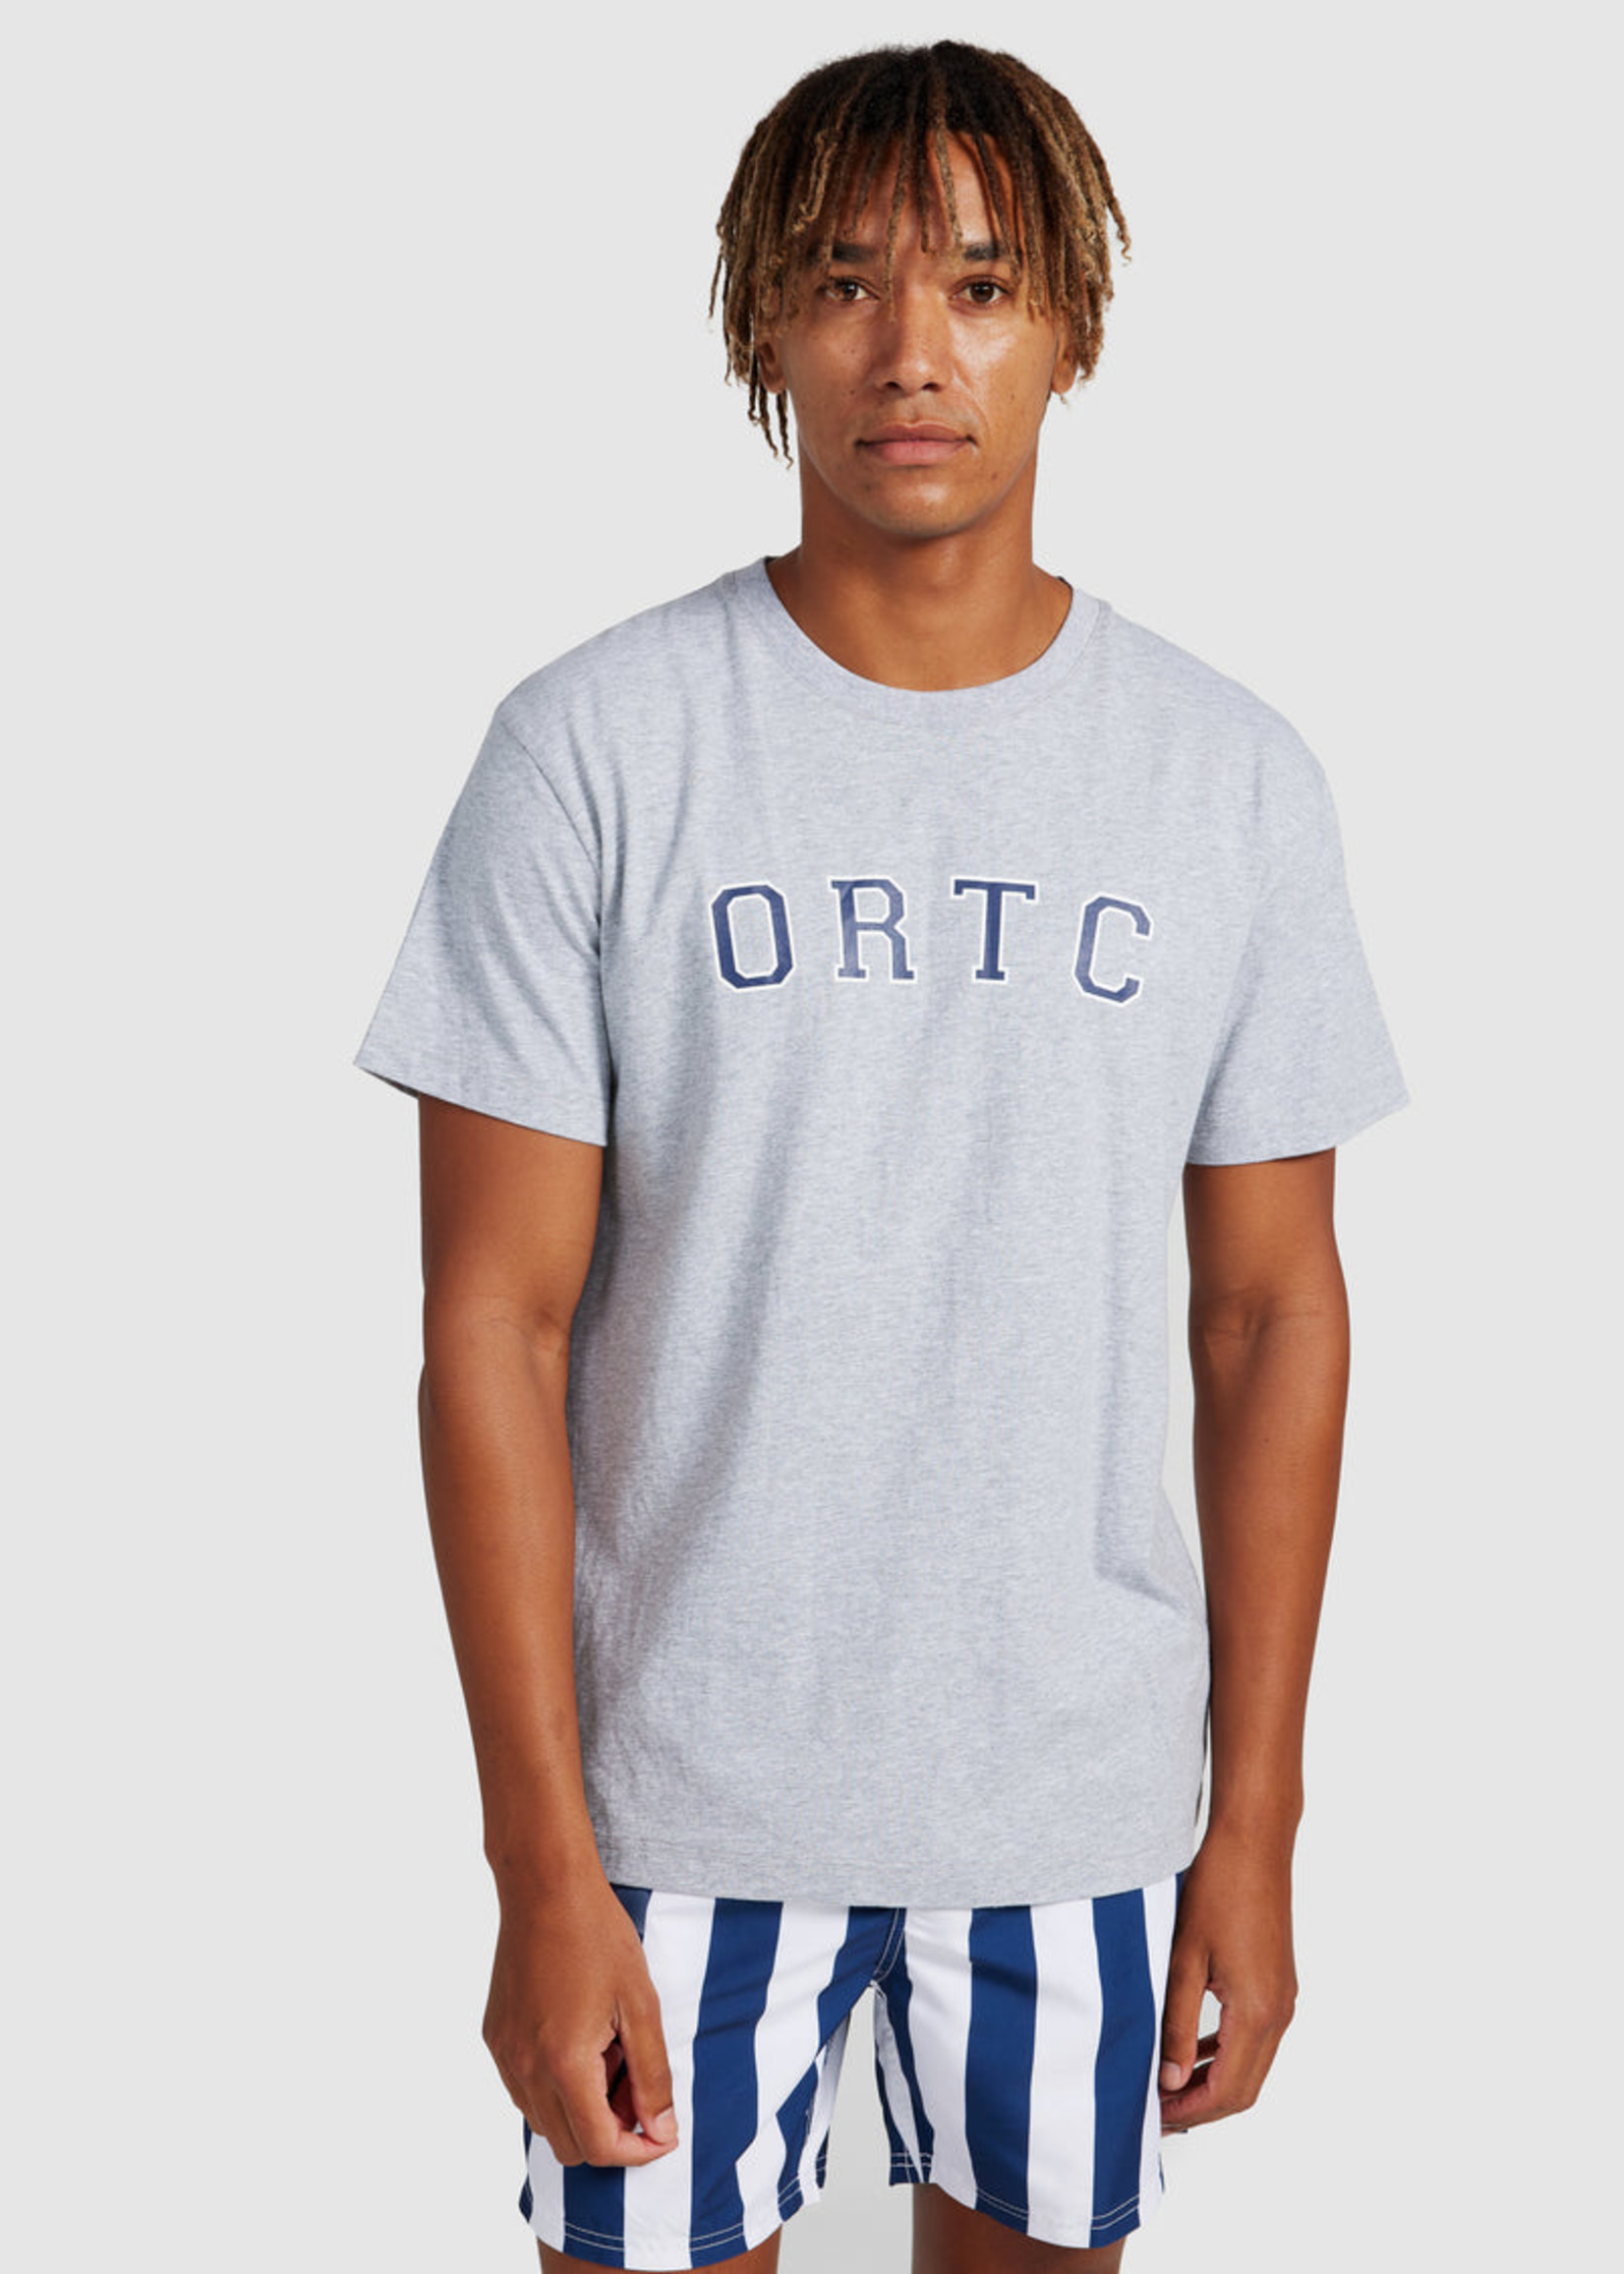 ORTC College T shirt (Grey Marle)